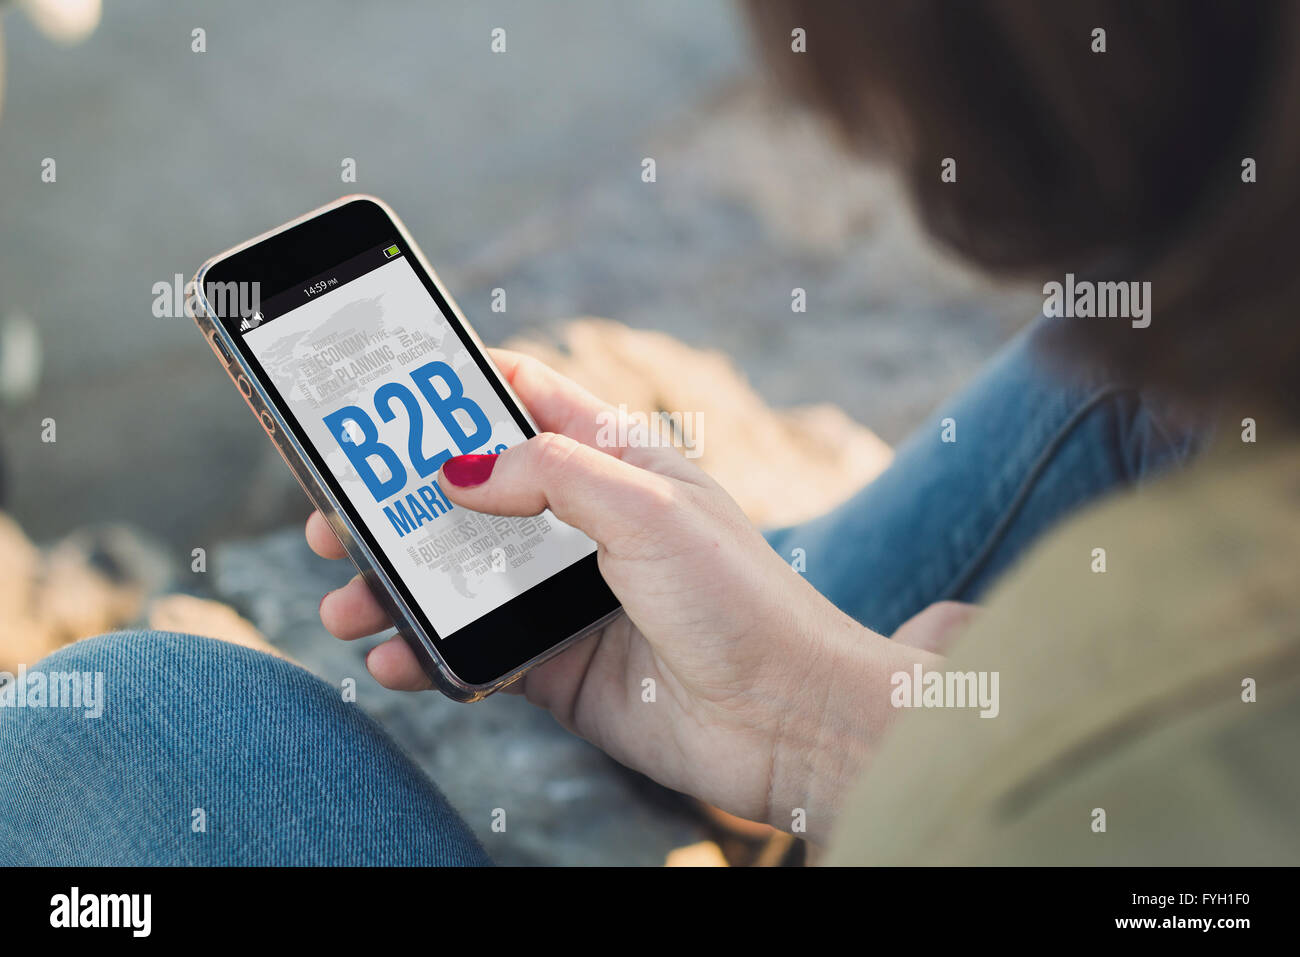 woman holding a smartphone and touching the screen shoing b2b marketing concept. All screen graphics are made up. Stock Photo